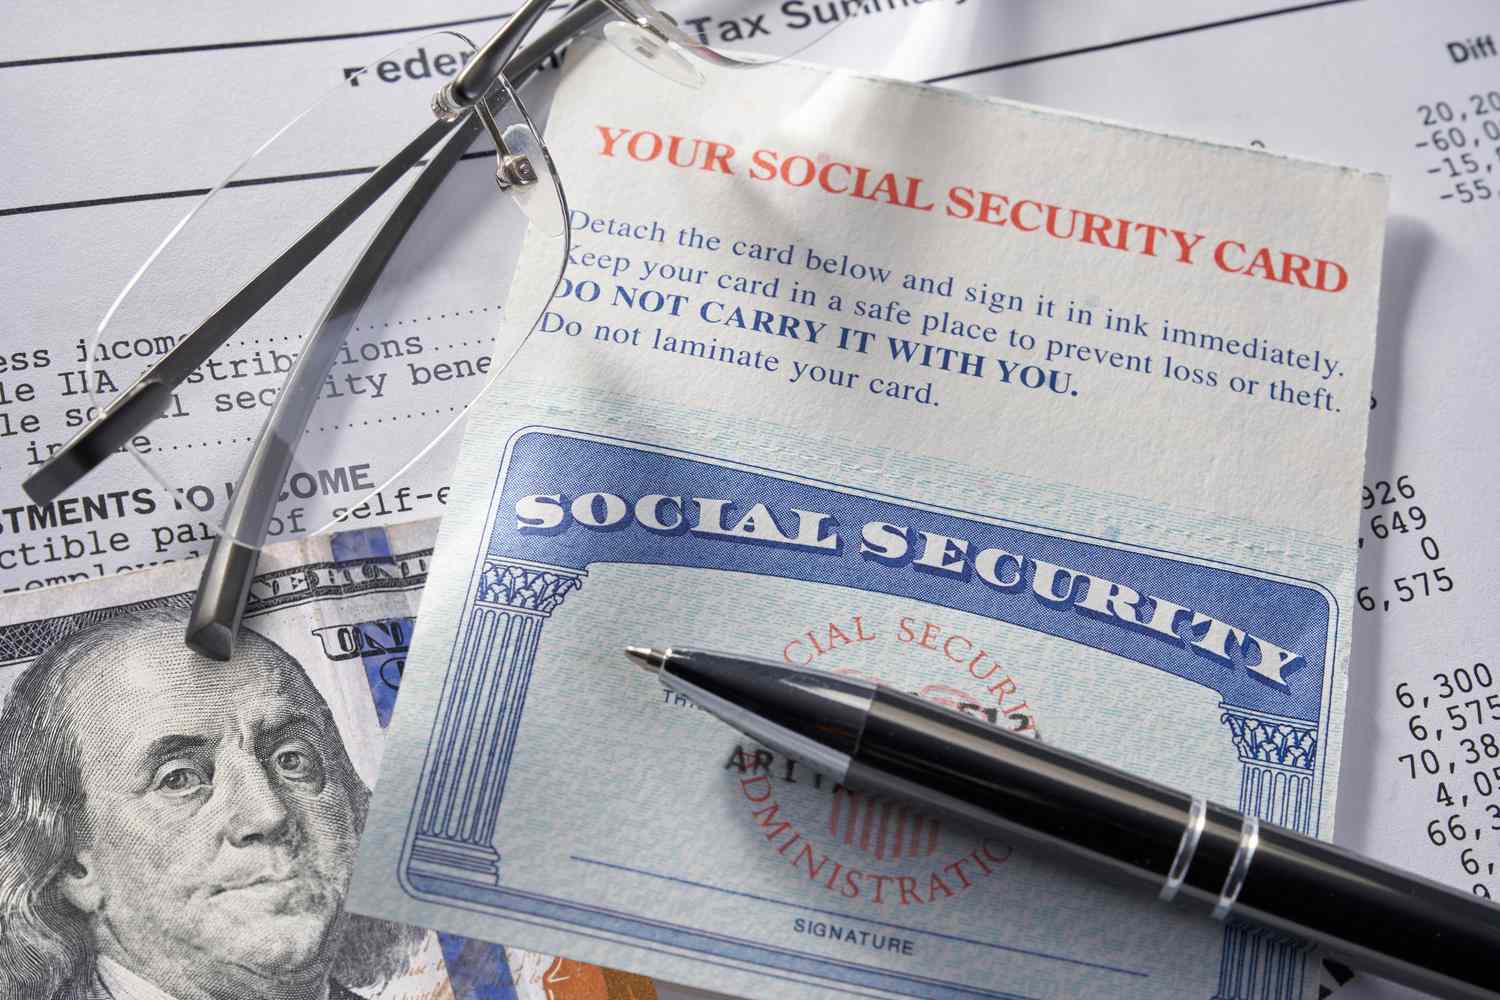 How to Replace Your Social Security Card Online Easily @ ssa.gov